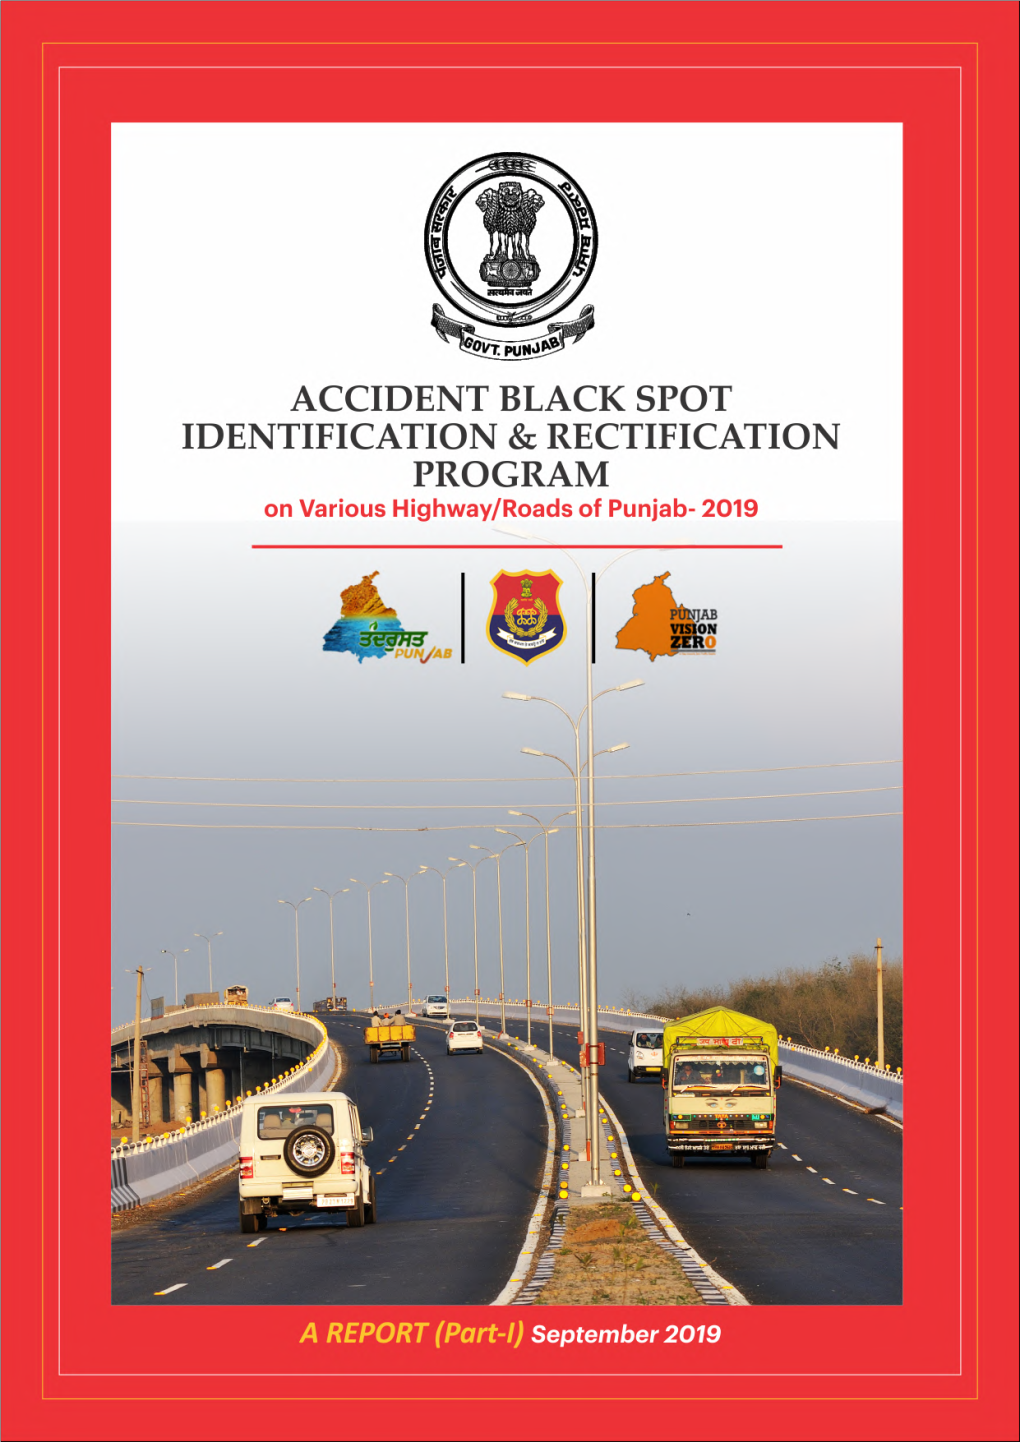 Accident Black Spot & Rectification Program on Various Highway